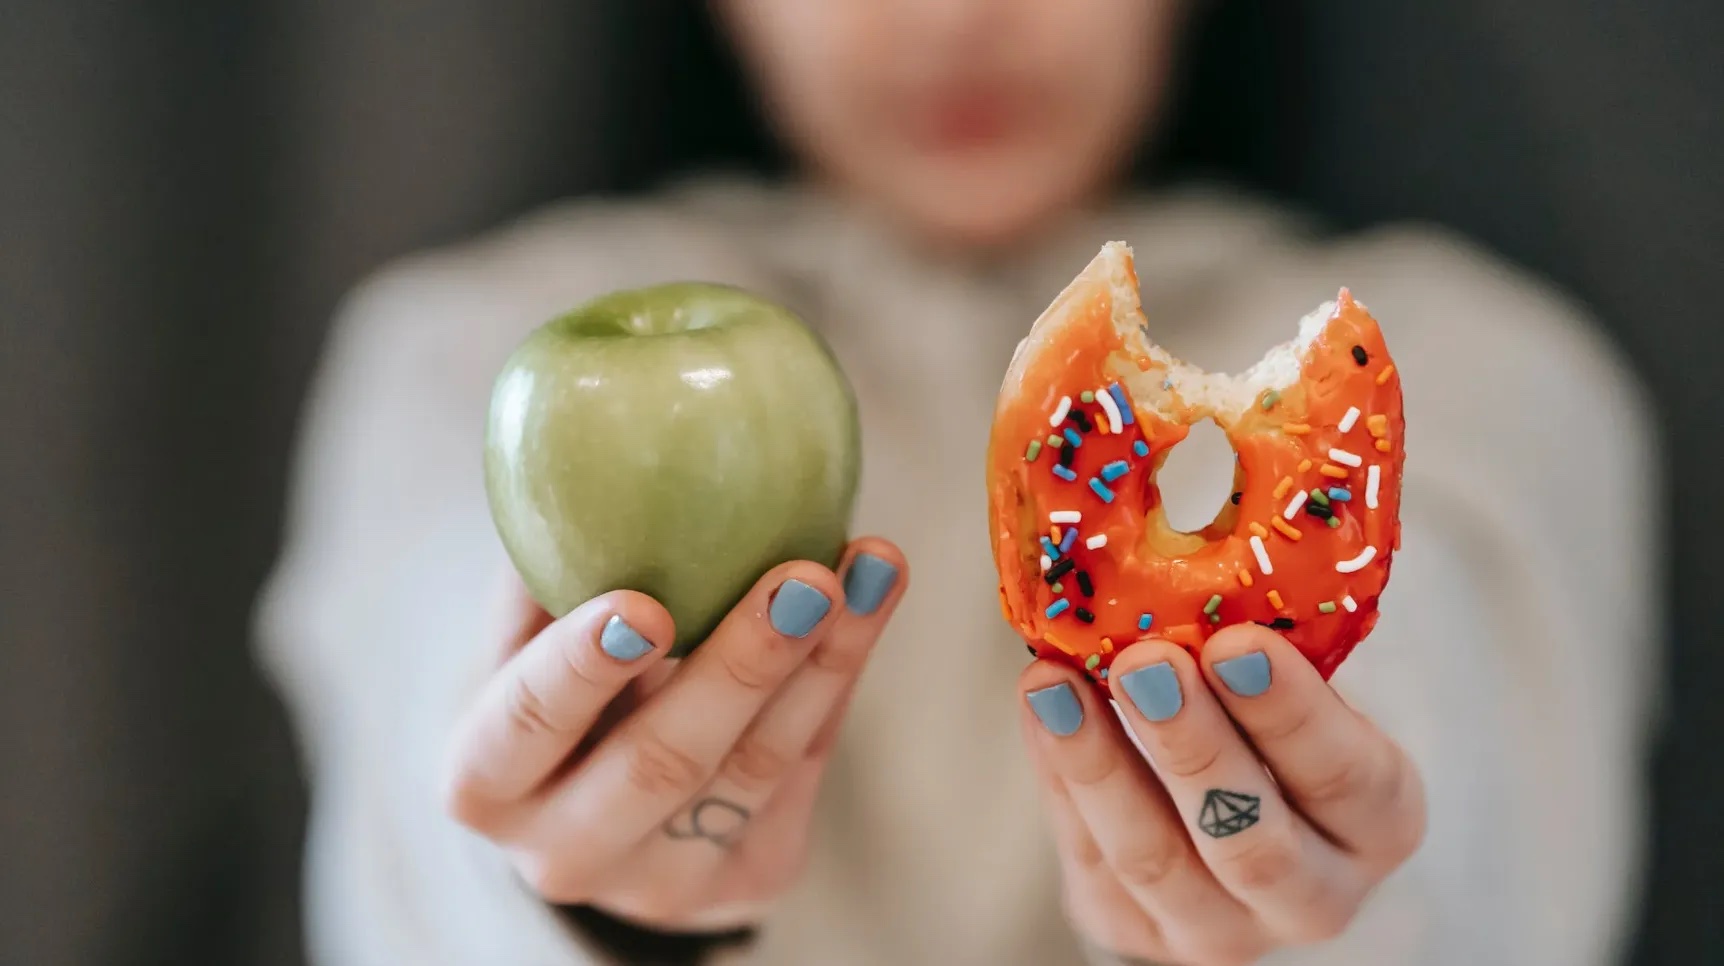 Someone is holding an apple in one hand and a donught in the other hand. Image: Pexels - Andres Ayrton